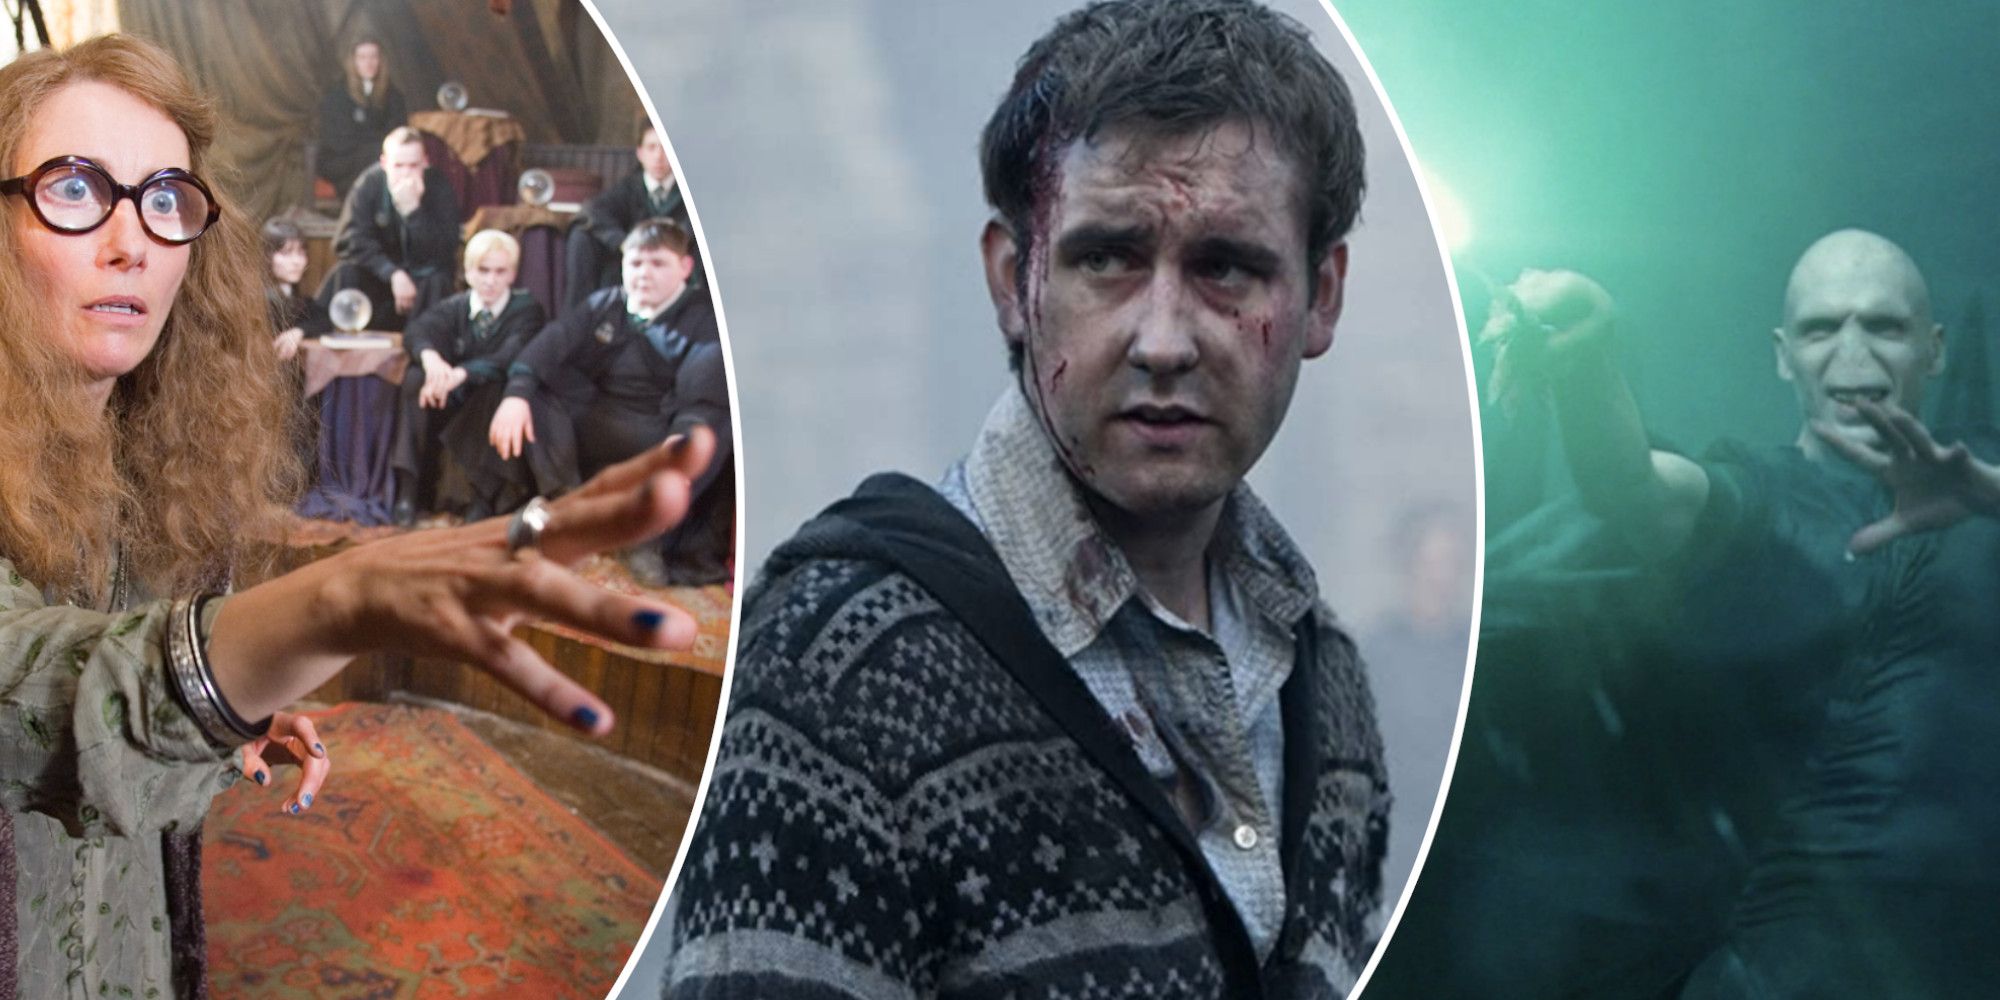 Harry Potter Ways Neville Longbottom Could Be The Perfect Chosen One Sybill Trelawney and Voldemort